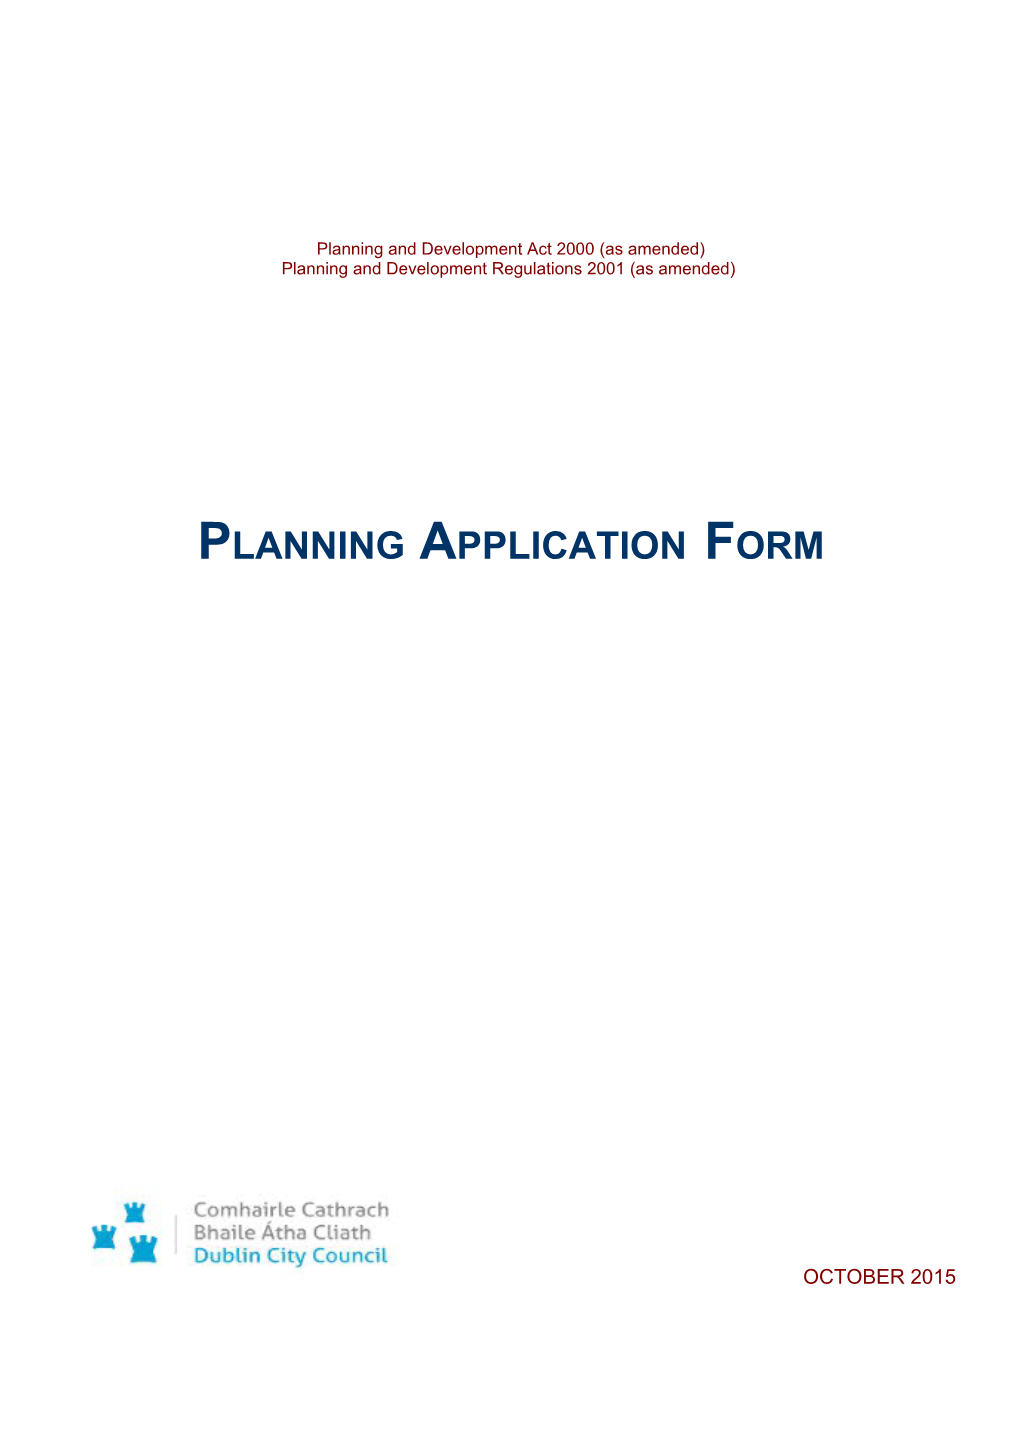 Planning and Development Act 2000 (As Amended)